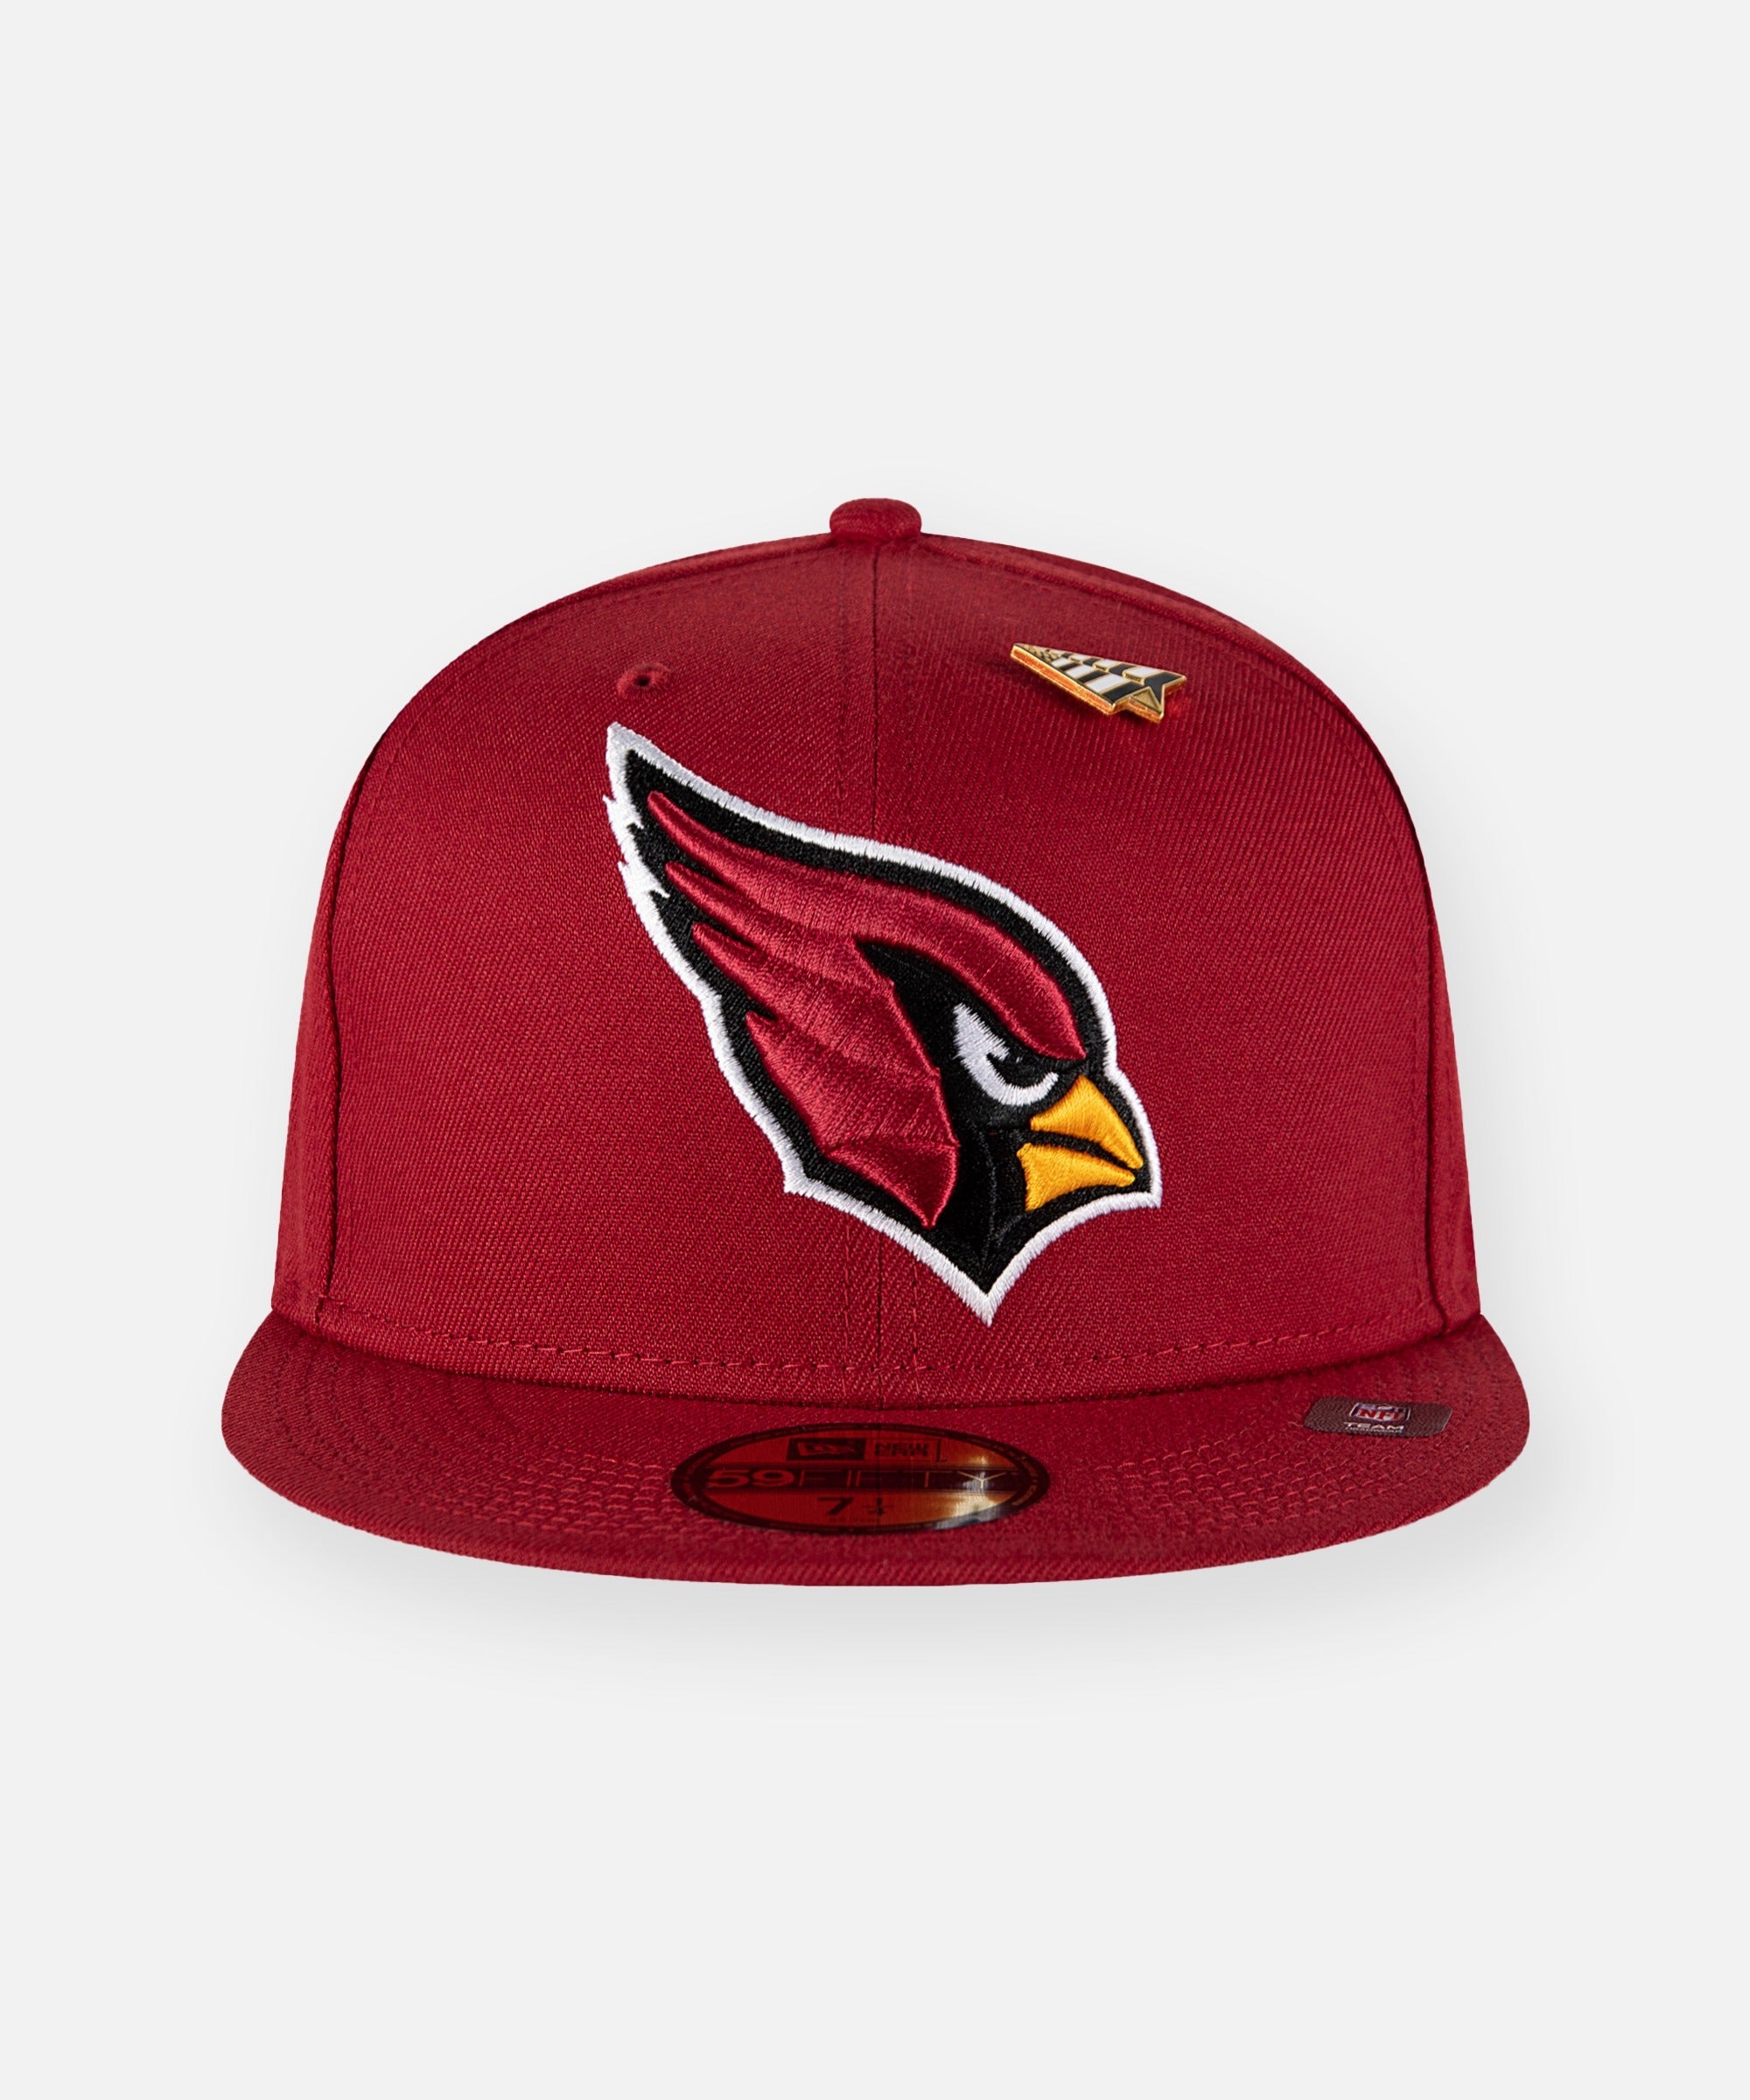 Paper Planes x Arizona Cardinals Team Color 59Fifty Fitted Hat